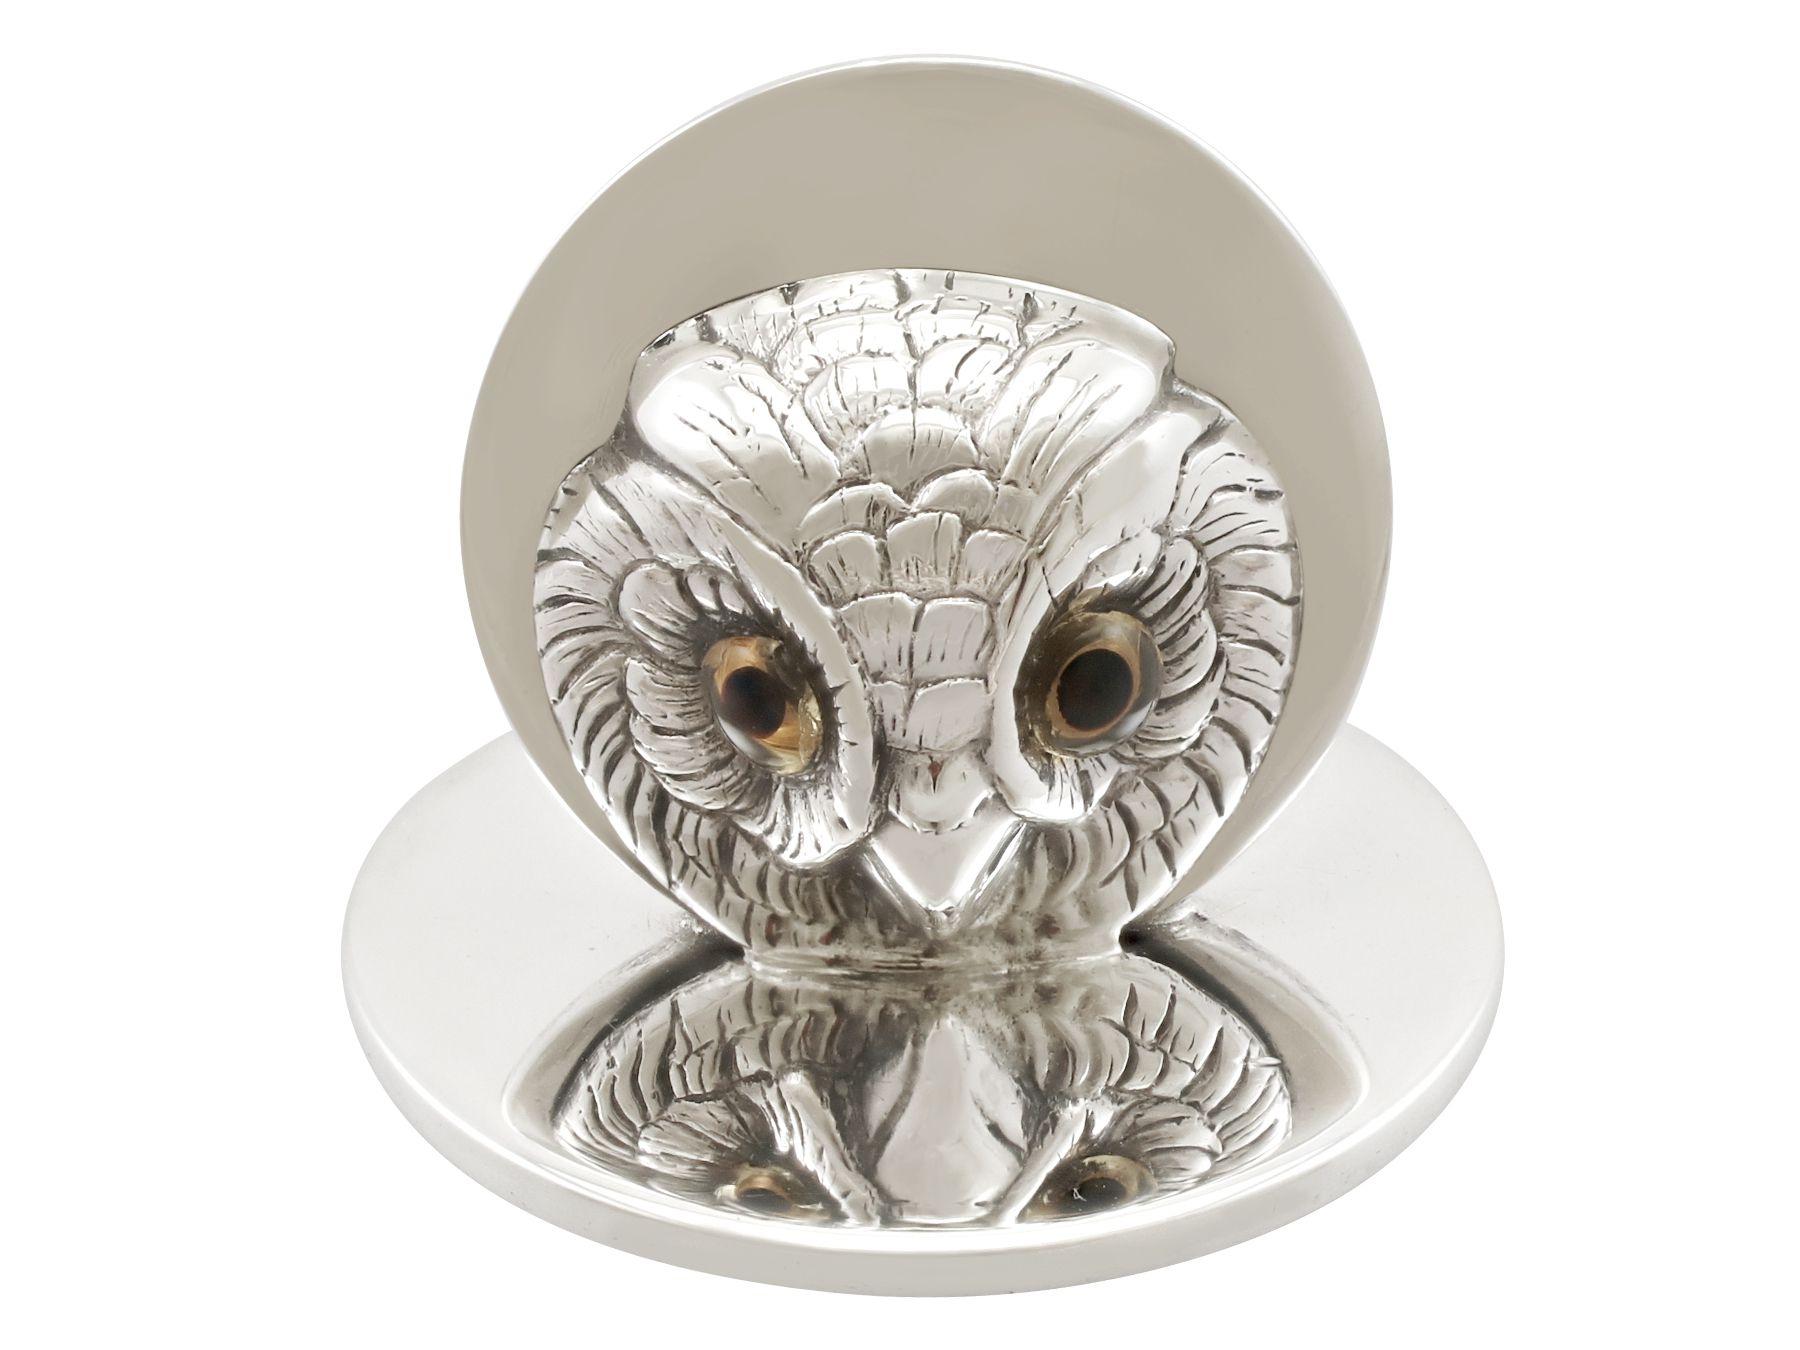 An exceptional, fine and impressive set of four antique George V English sterling silver owl menu / card holders; an addition to our diverse dining silverware collection.

These exceptional, fine and impressive antique George V cast sterling silver